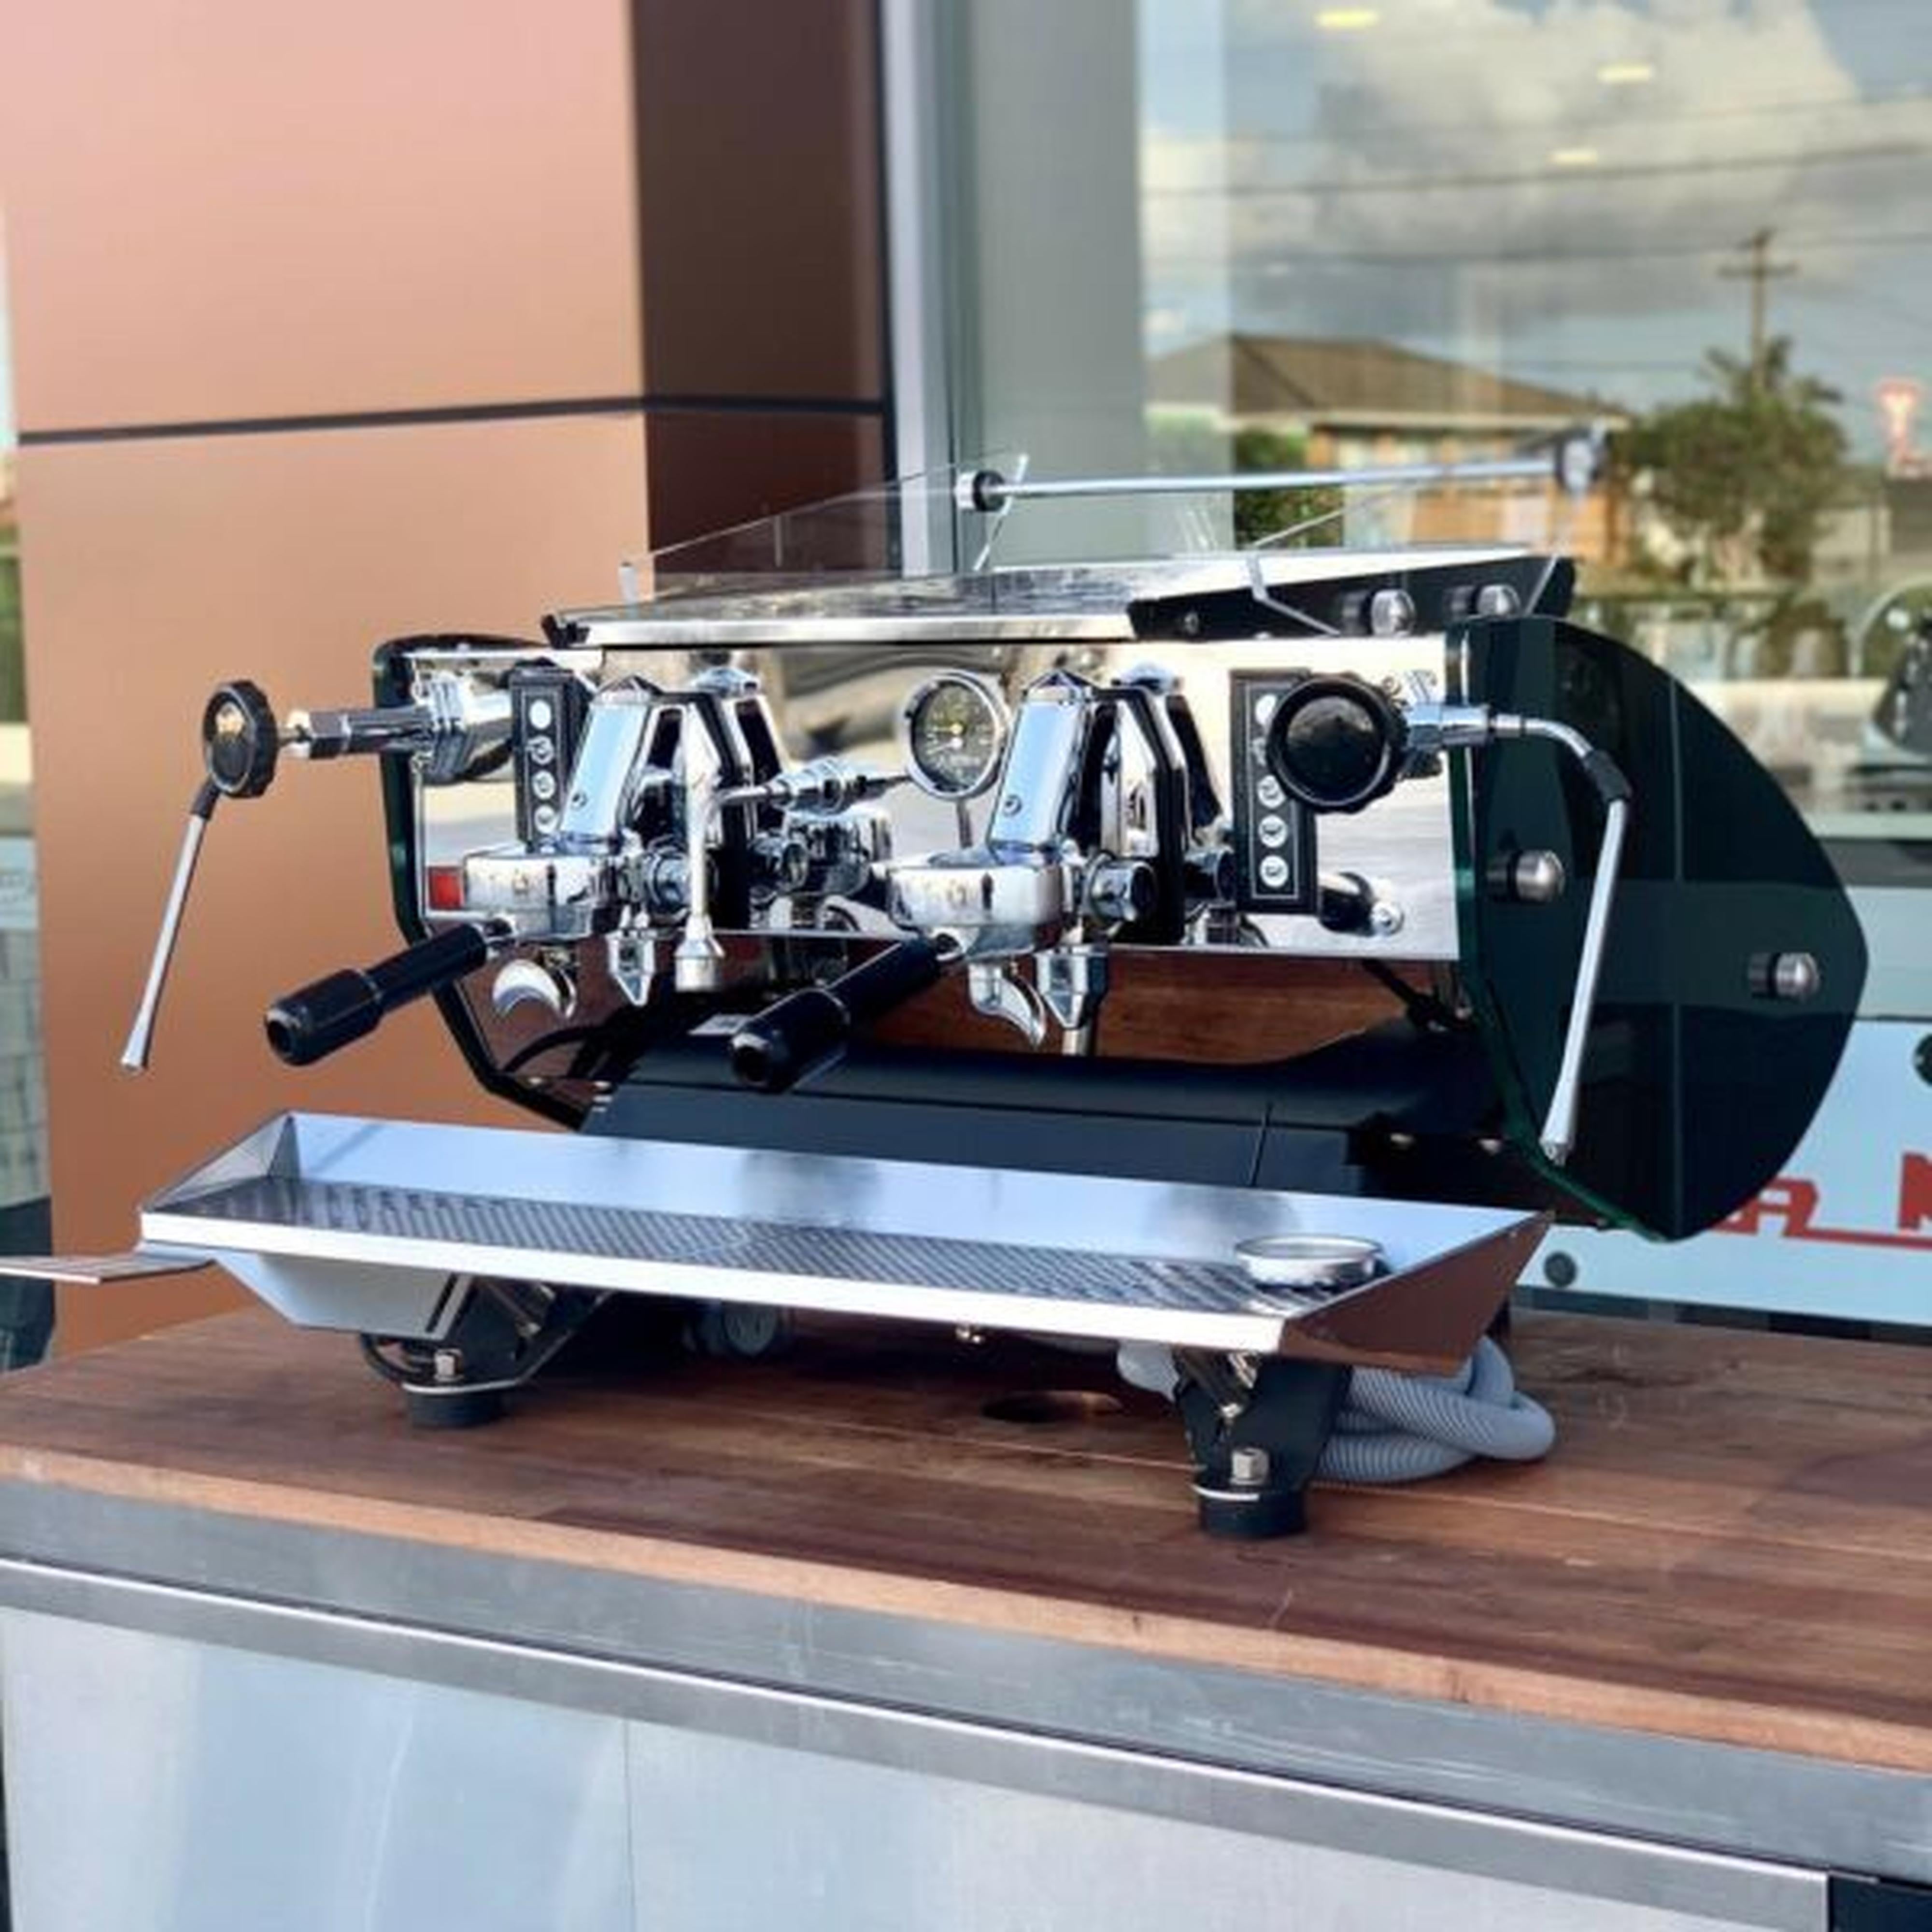 Immaculate 2 Group KVDW Mirrage Commercial Coffee Machine